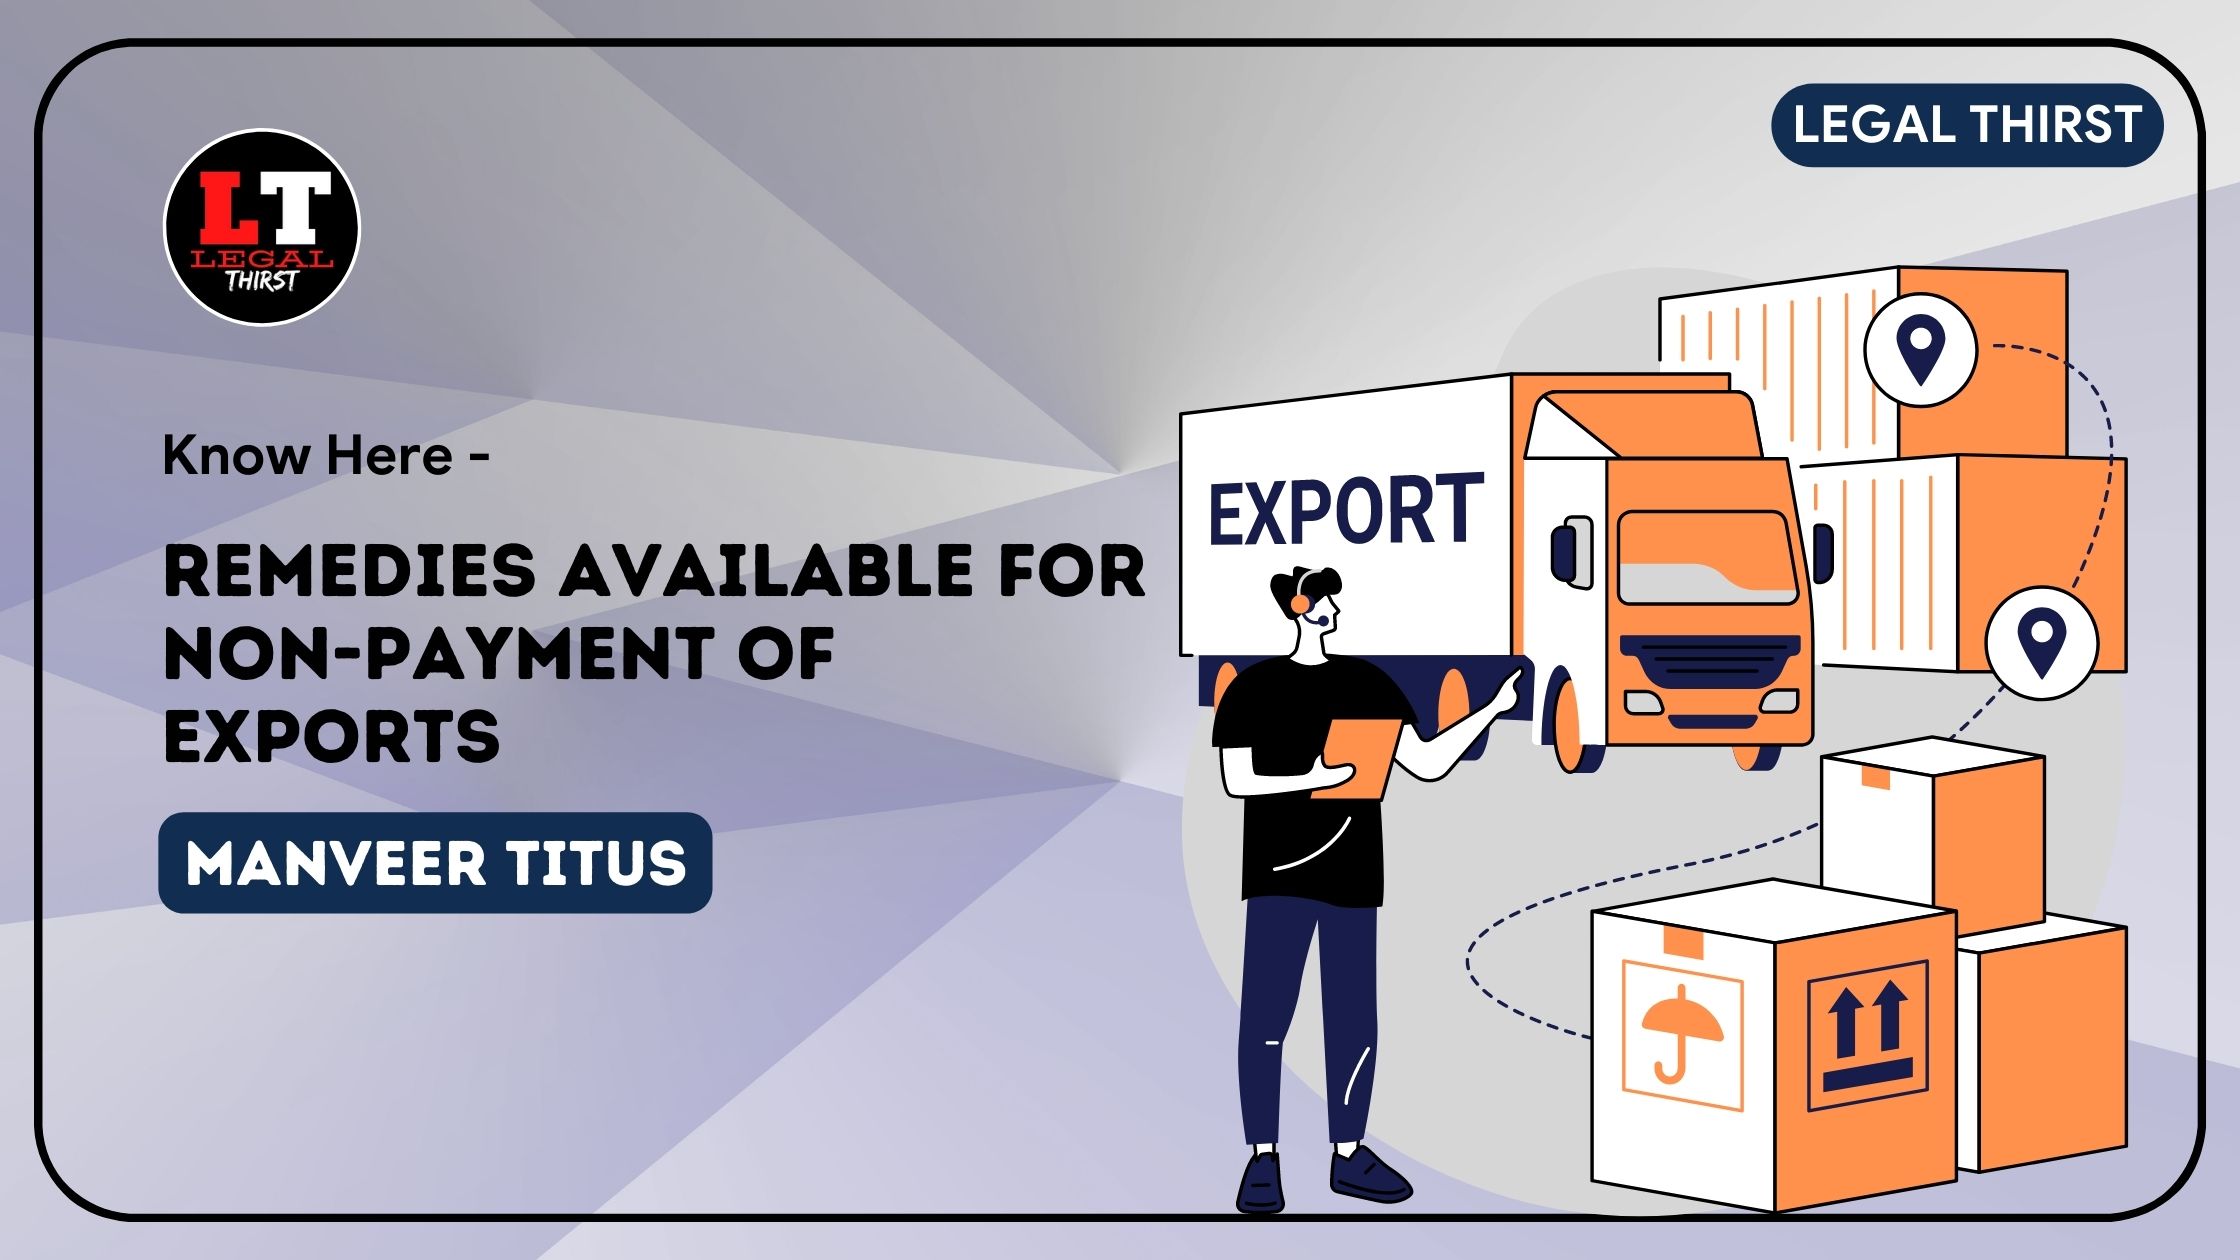 Remedies available FOR NON-PAYMENT OF EXPORTS - Know Here